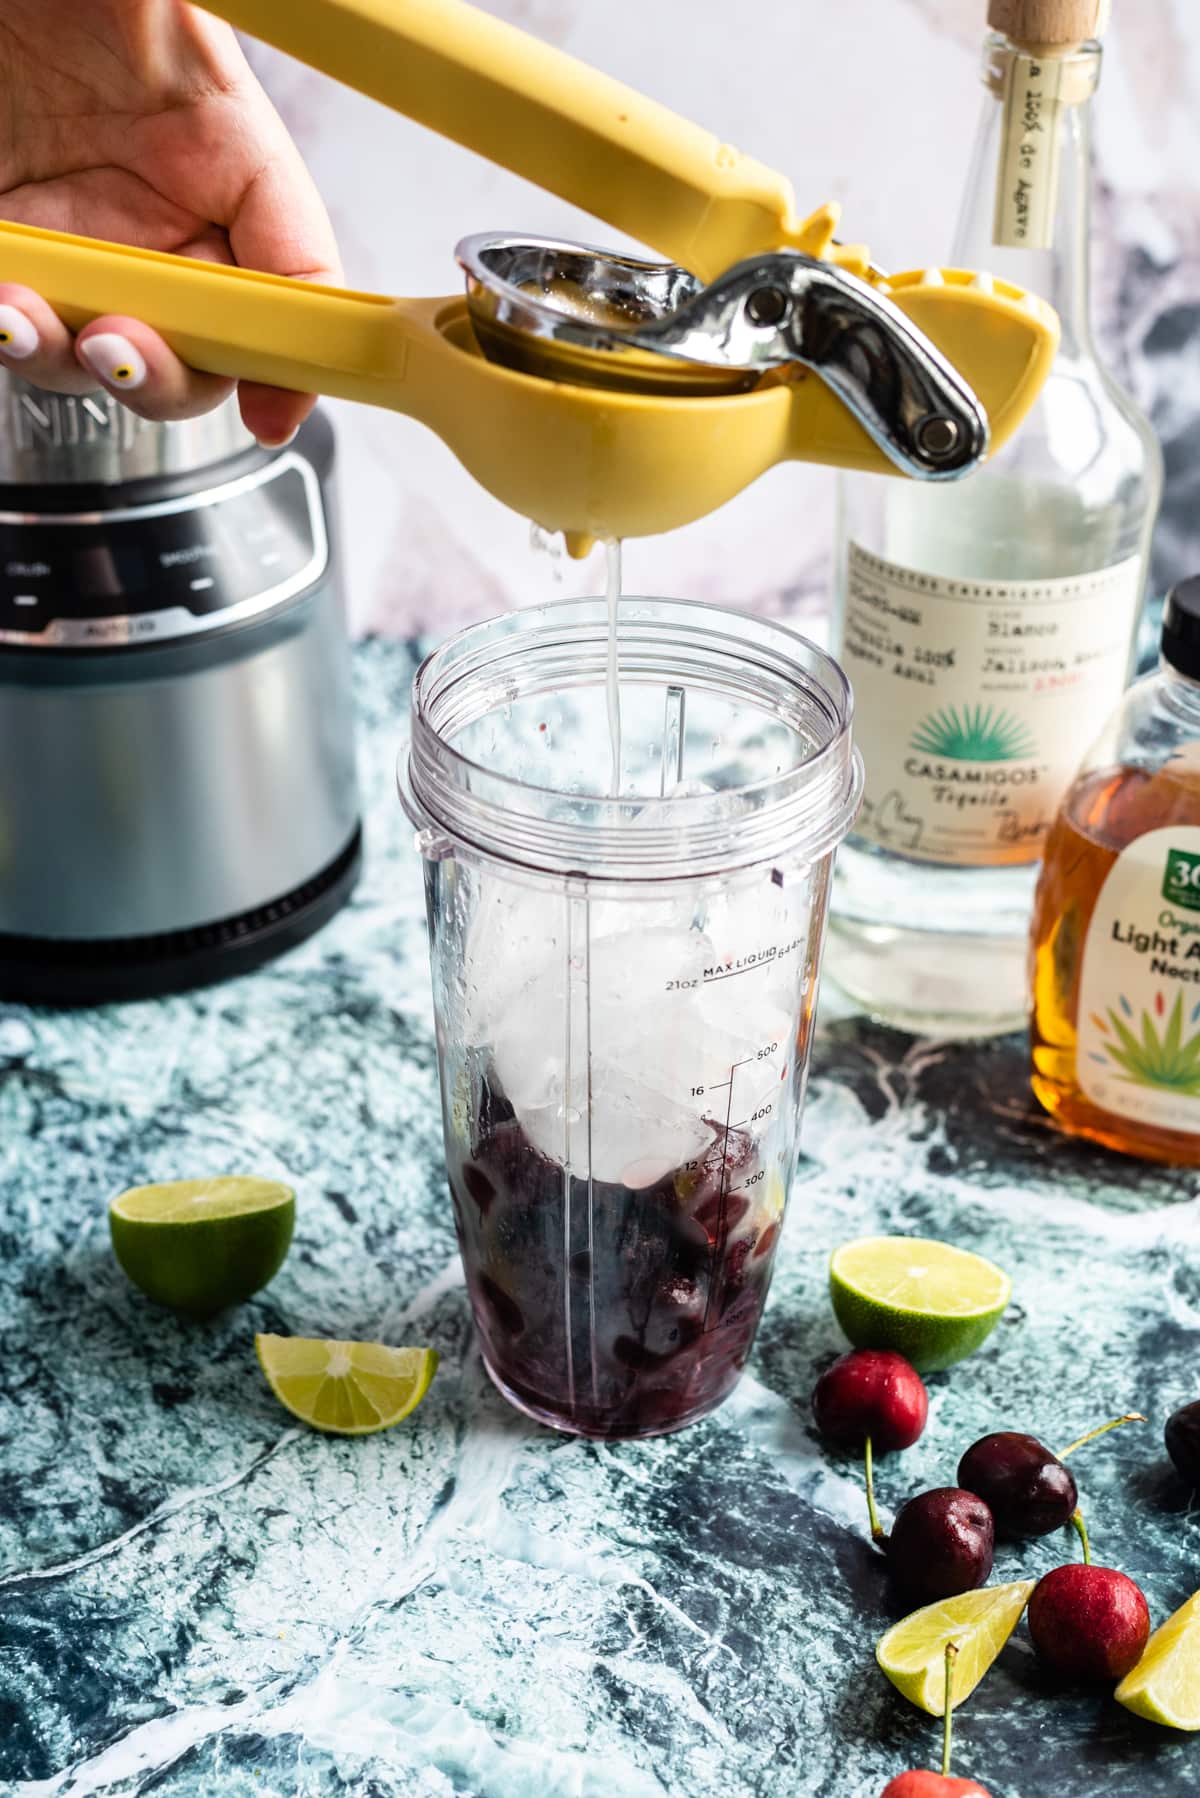 Lime juice being squeezed into a blender filled with ice and cherries.